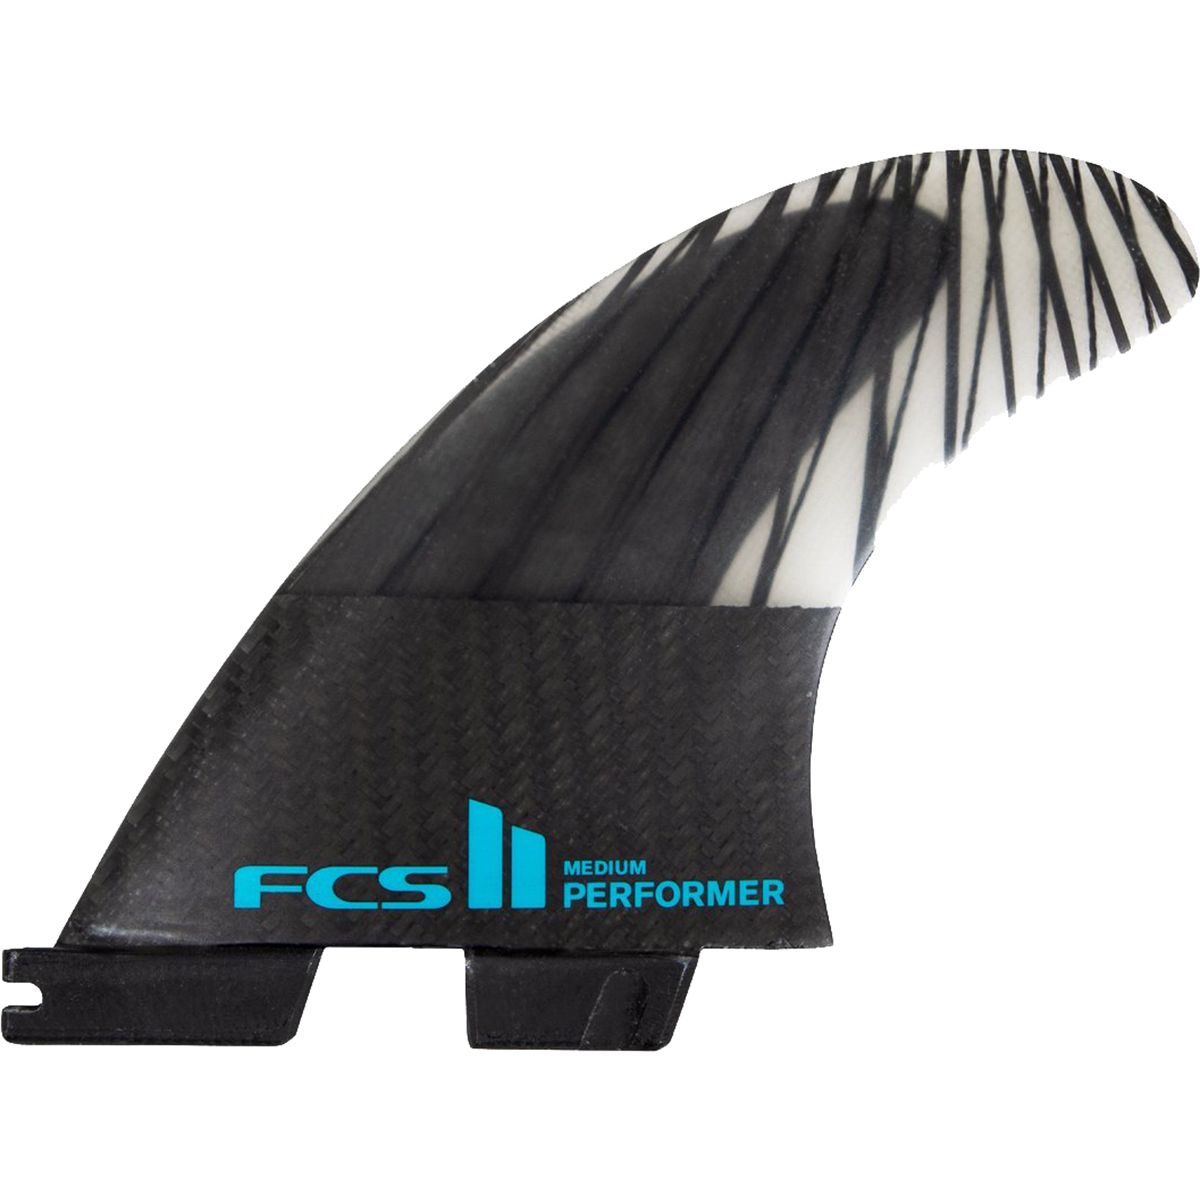 FCS Performer PC Carbon Thruster Surfboard Fins